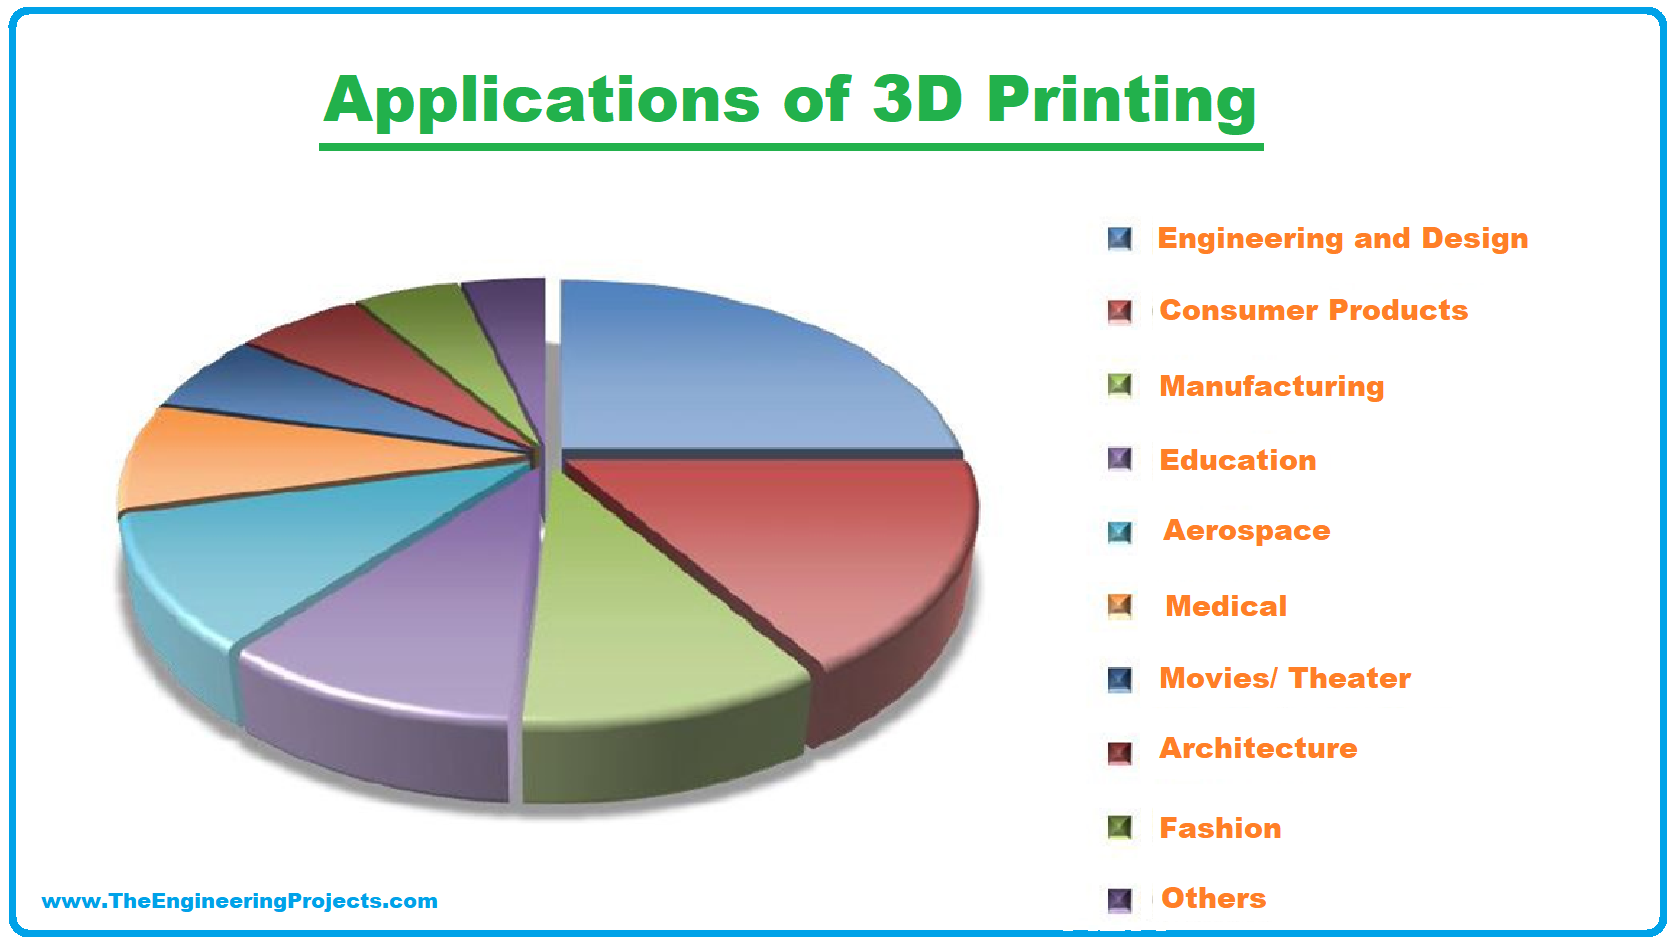 What is 3D Printing, Definition of 3D printing, Technology Used In 3D Printing, Process of 3D printing, Applications of 3D Printing, 3d printing applications, 3d printing, 3d printer applications, applications of 3d printer